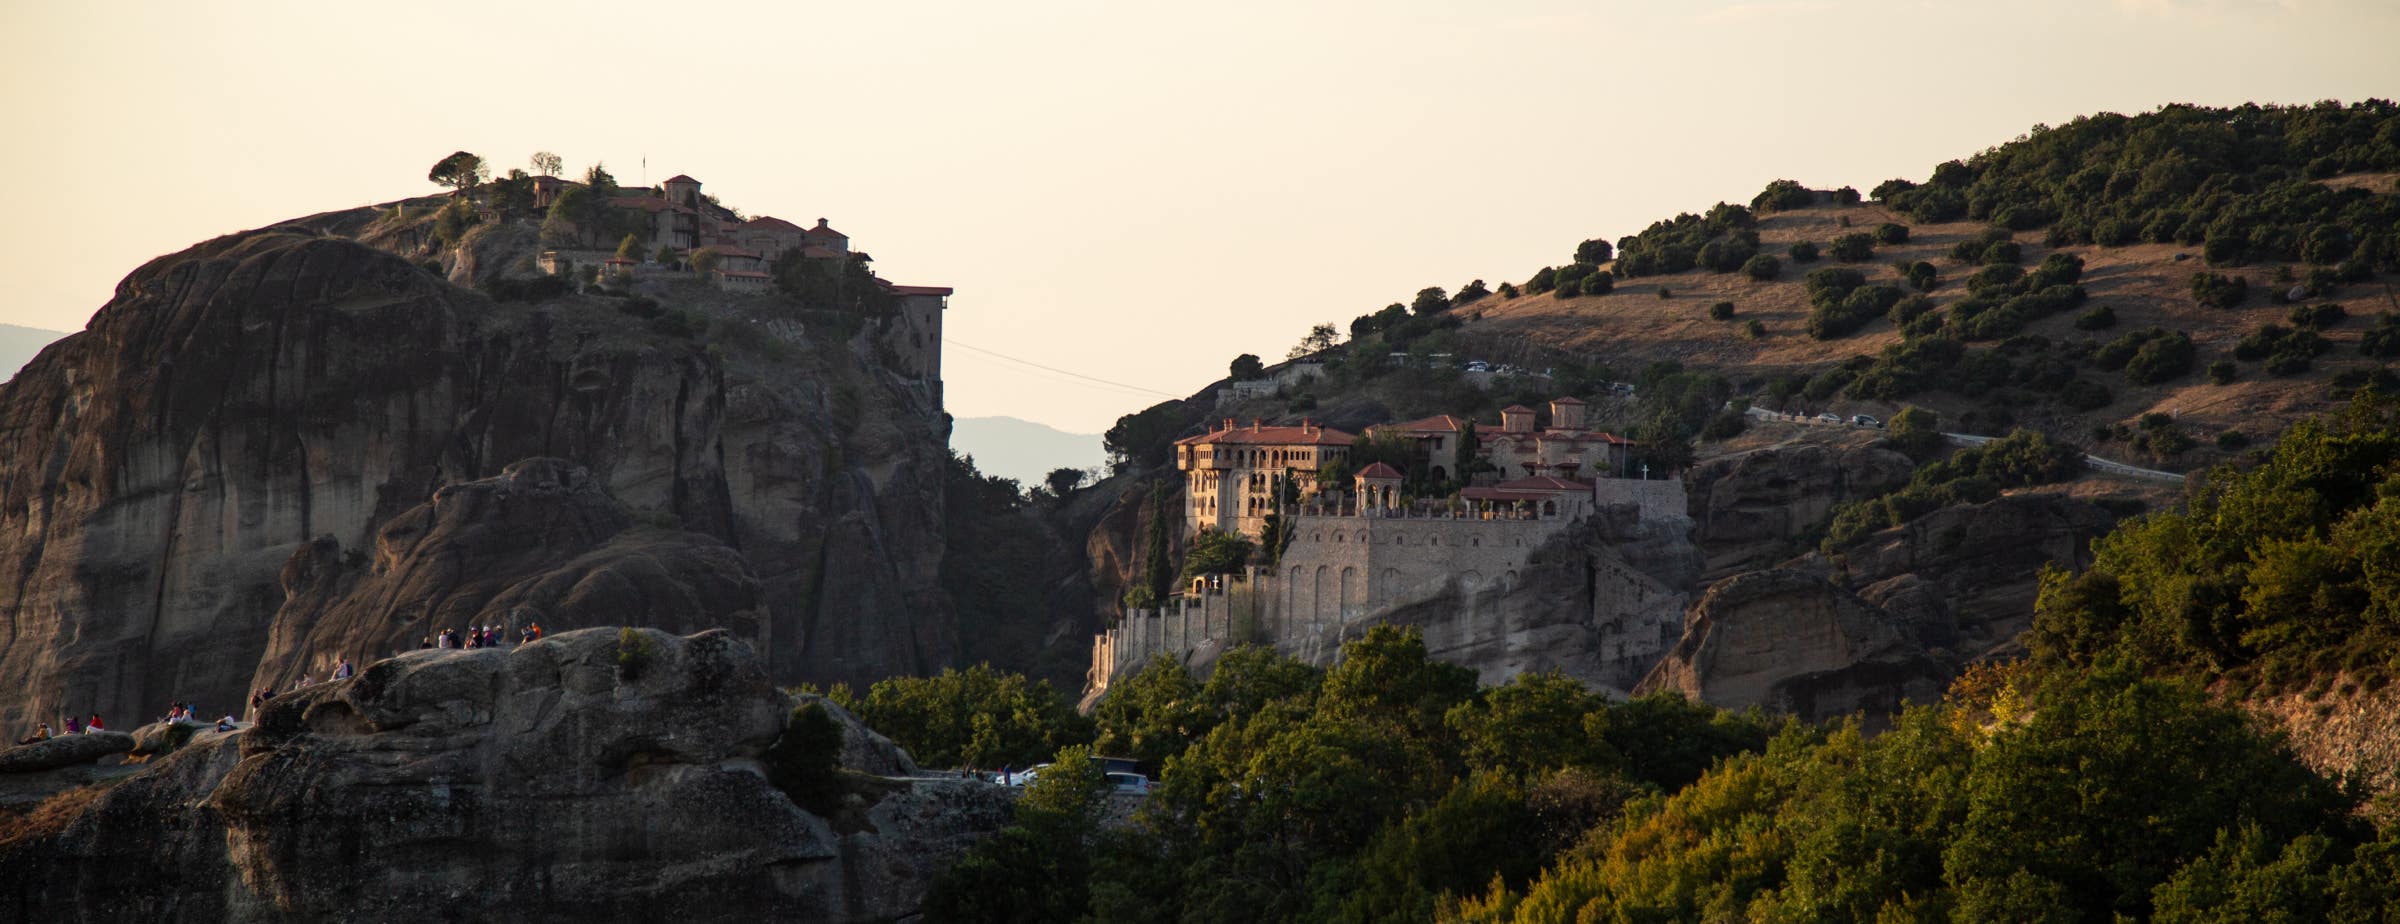 The image shows a view of the rocks and two monasteries of Meteora. The left monastery sits on top of a rock and the right monastery is built onto rocks on the side of larger hill.